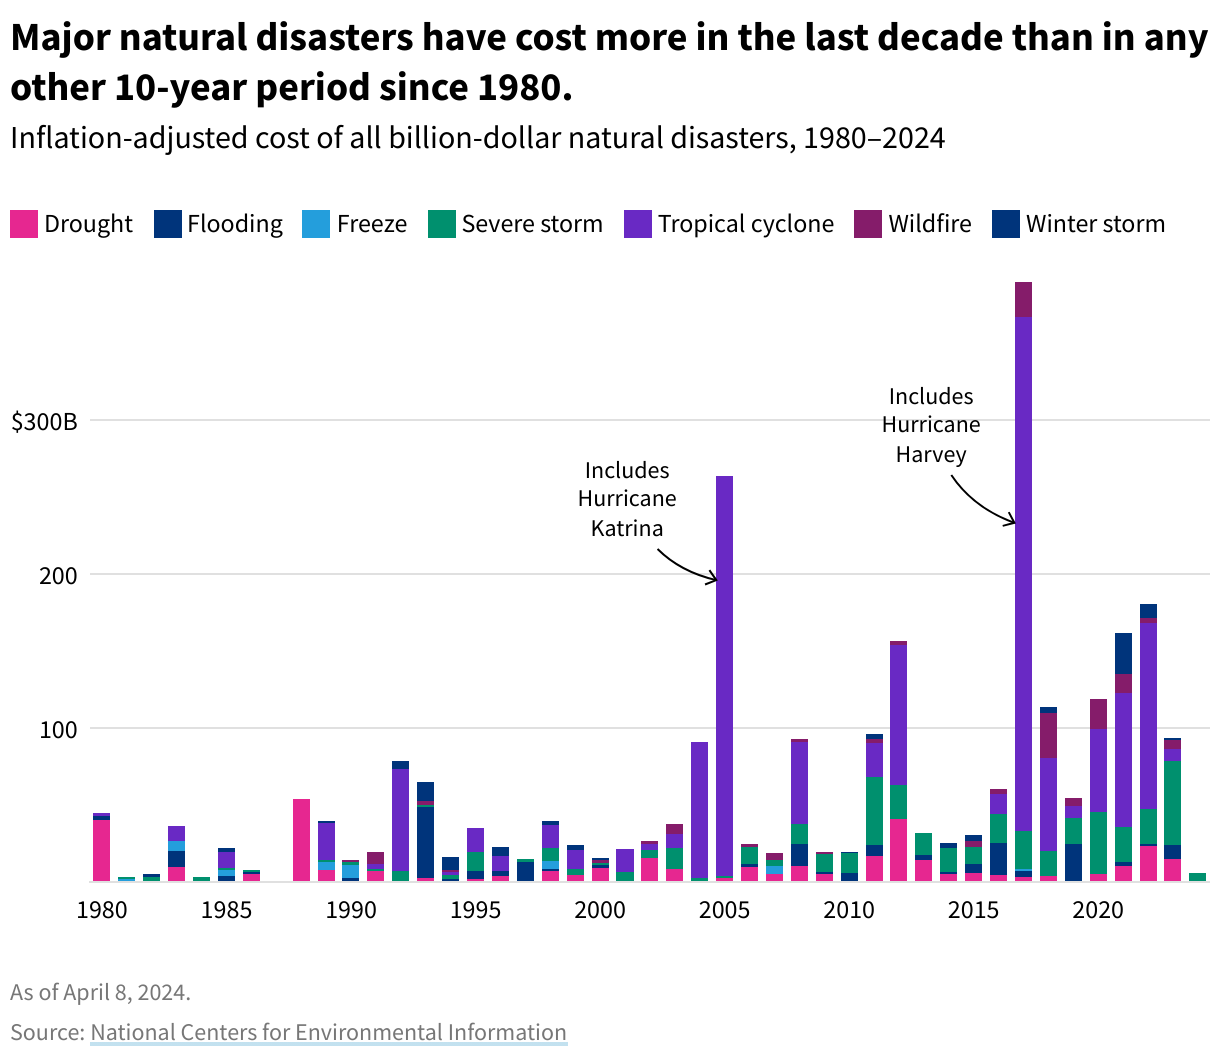 A stacked bar chart showing the inflation-adjusted cost of all billion-dollar natural disasters since 1980.